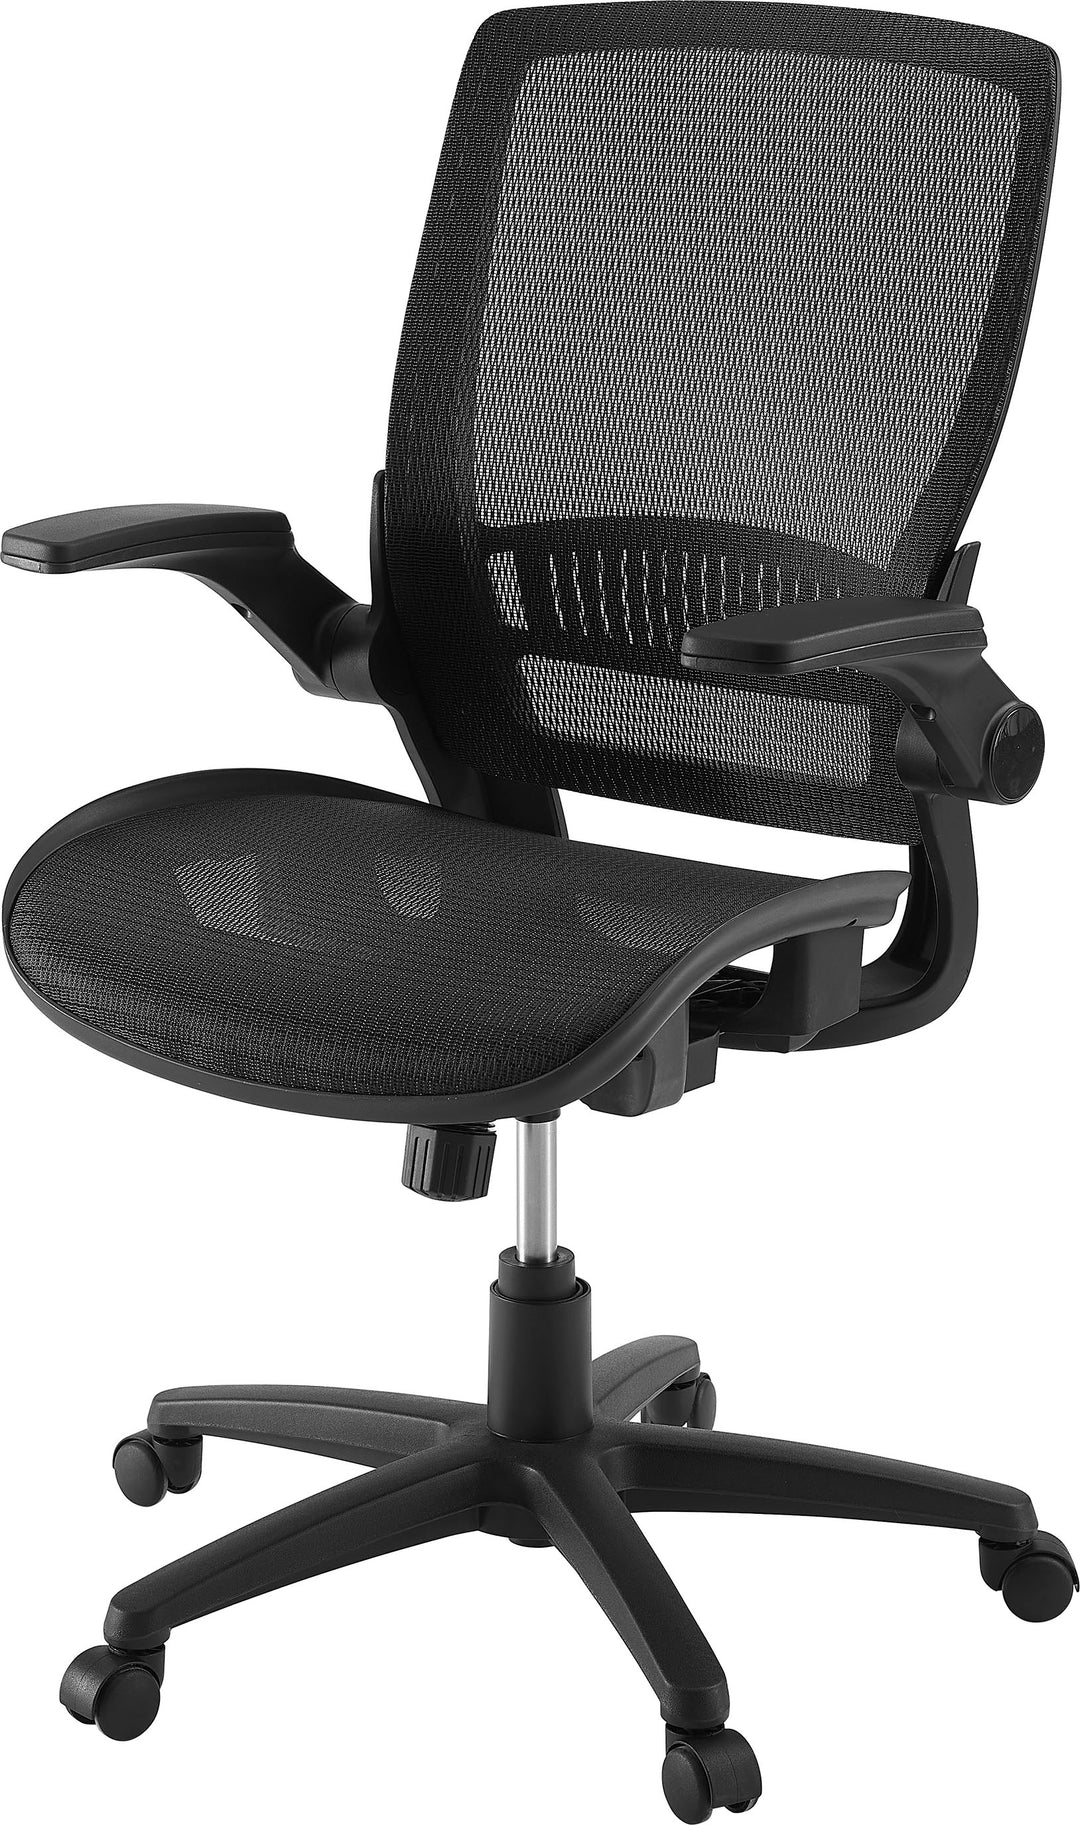 Insignia™ - Ergonomic Mesh Office Chair with Adjustable Arms - Black_2